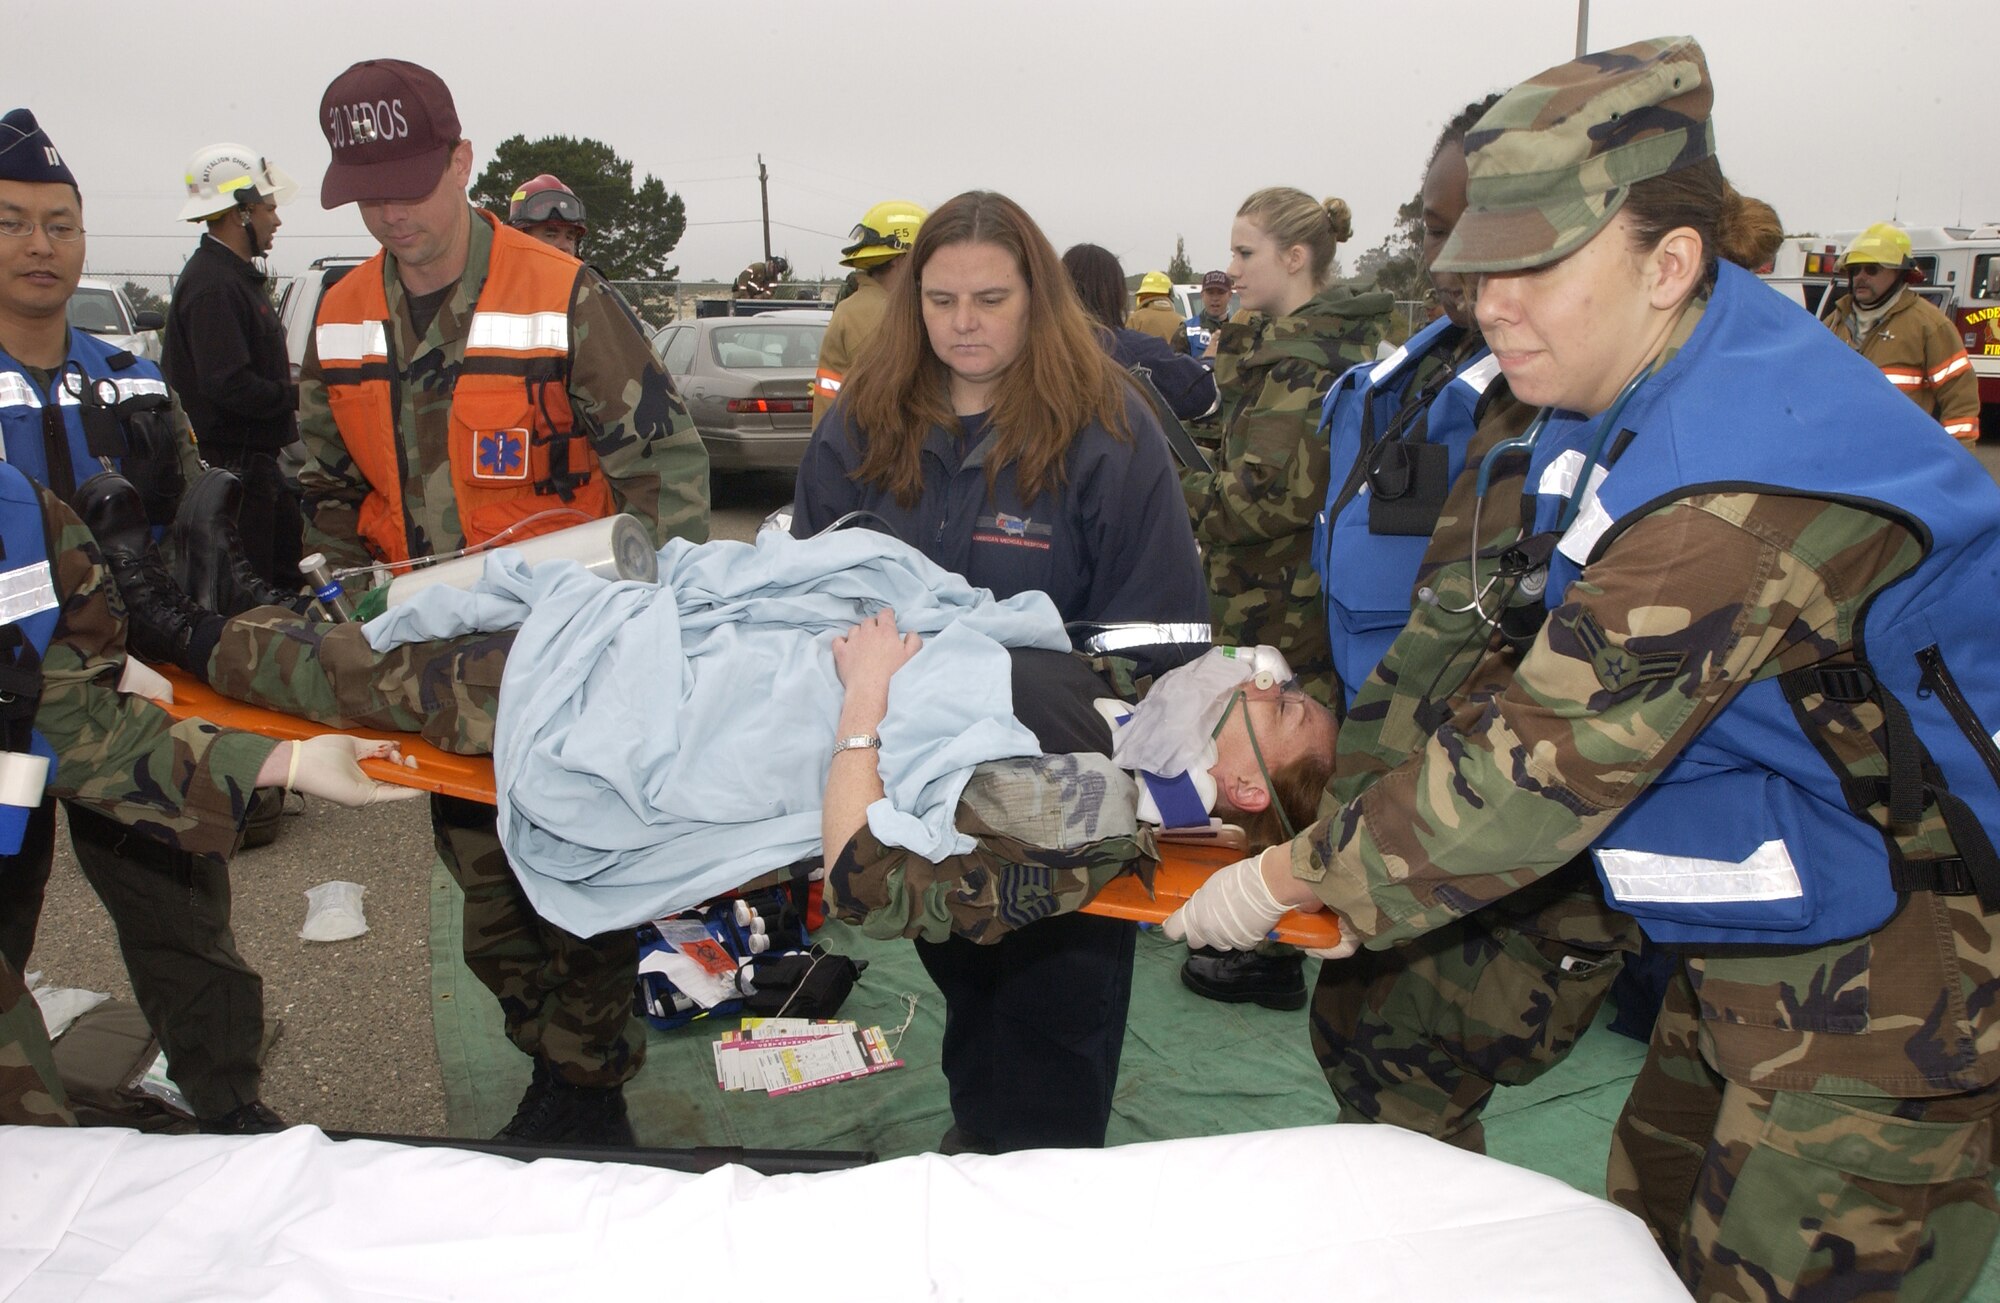 During the first day of the Foggy Shores exercise, 30th Medical Operations Squadron Airmen transport Tech. Sgt Suzanne Bell, 30th MDOS, as she simulates an injury. A simulated earthquake partially collapsed Bldg. 8500, trapping many people inside as part of a Foggy Shores exercise at Vandenberg Air Force Base on May 14 to 15. (U.S. Air Force Photo by Staff Sgt Angelique Perez)